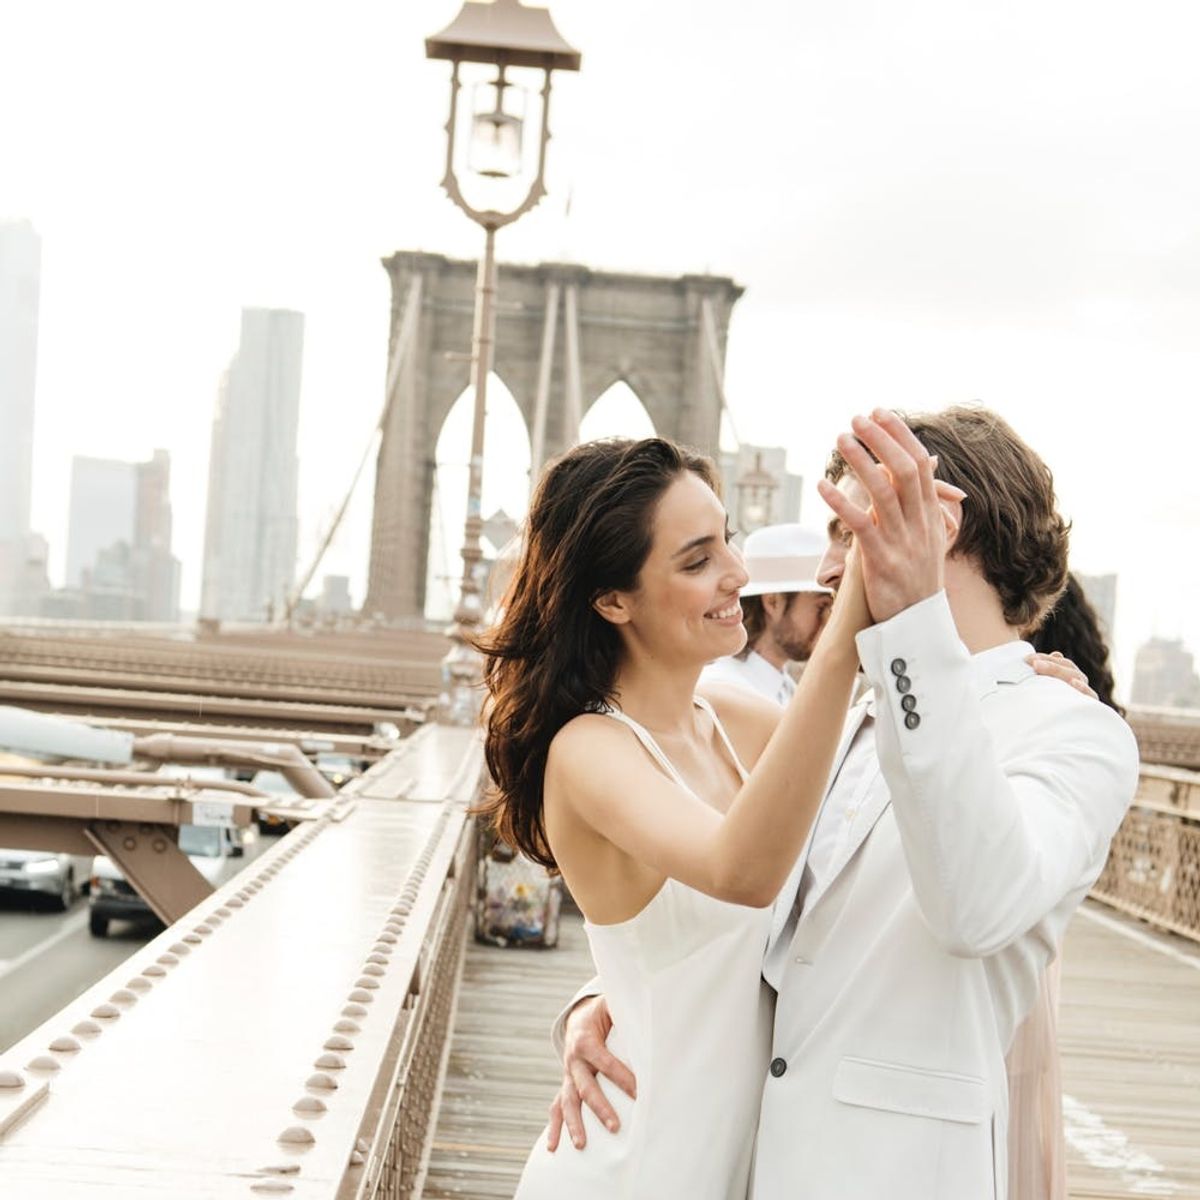 5 Ways Millennials Are Doing Weddings Differently